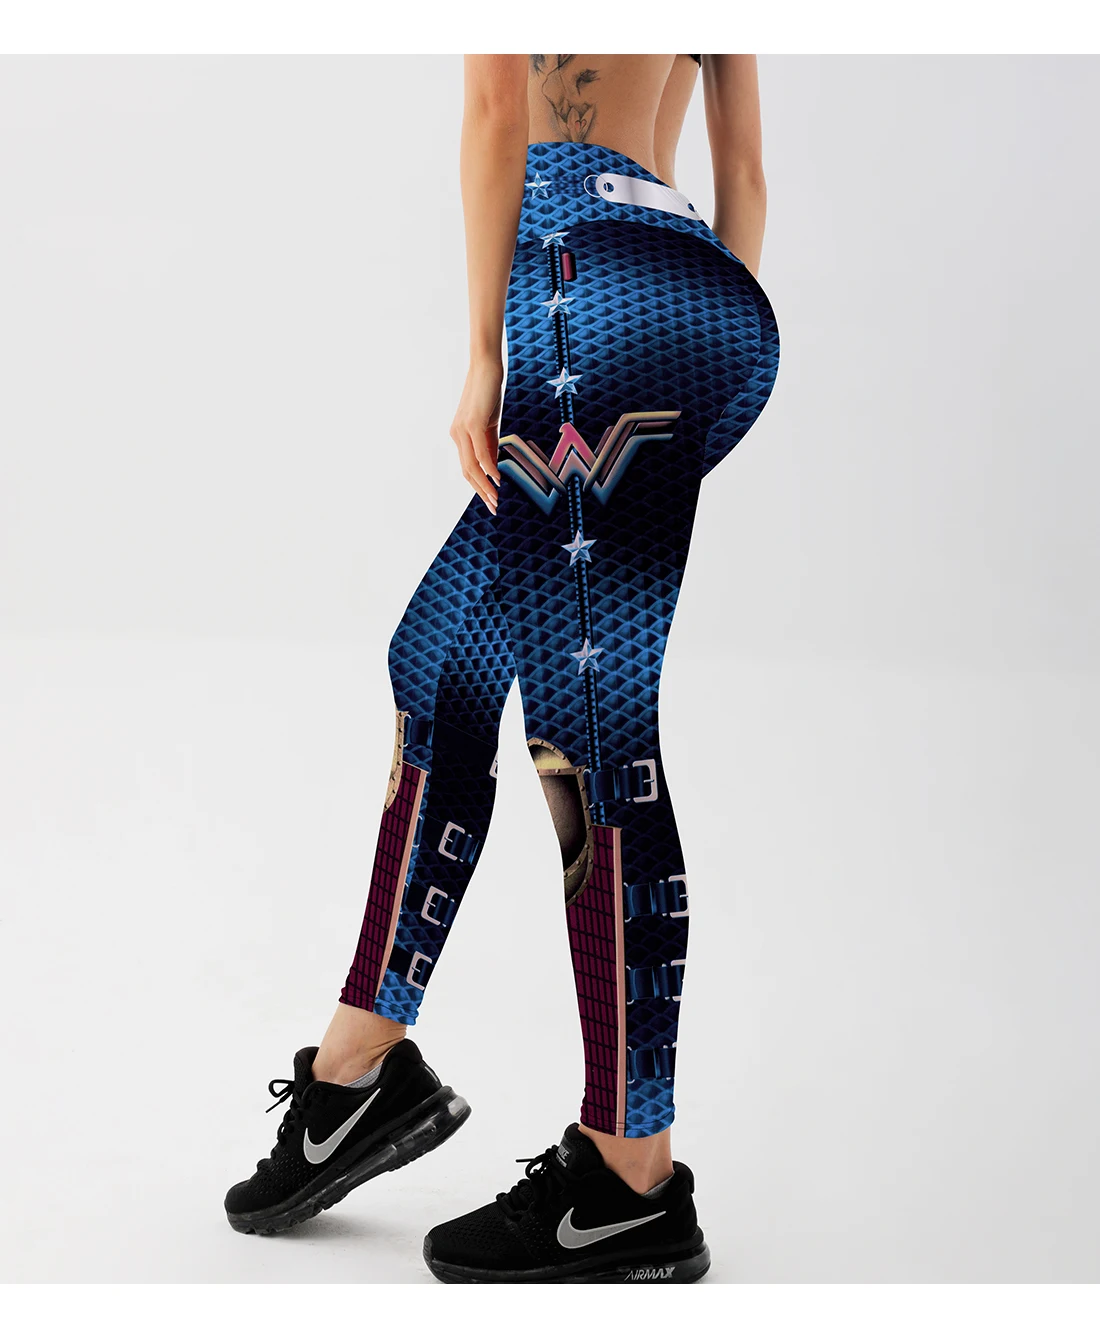 High Waist Women Digital Printed Work Out Training Fitness Leggings Push Up Sport GYM Leggings For Weight Loss Tummy Control.